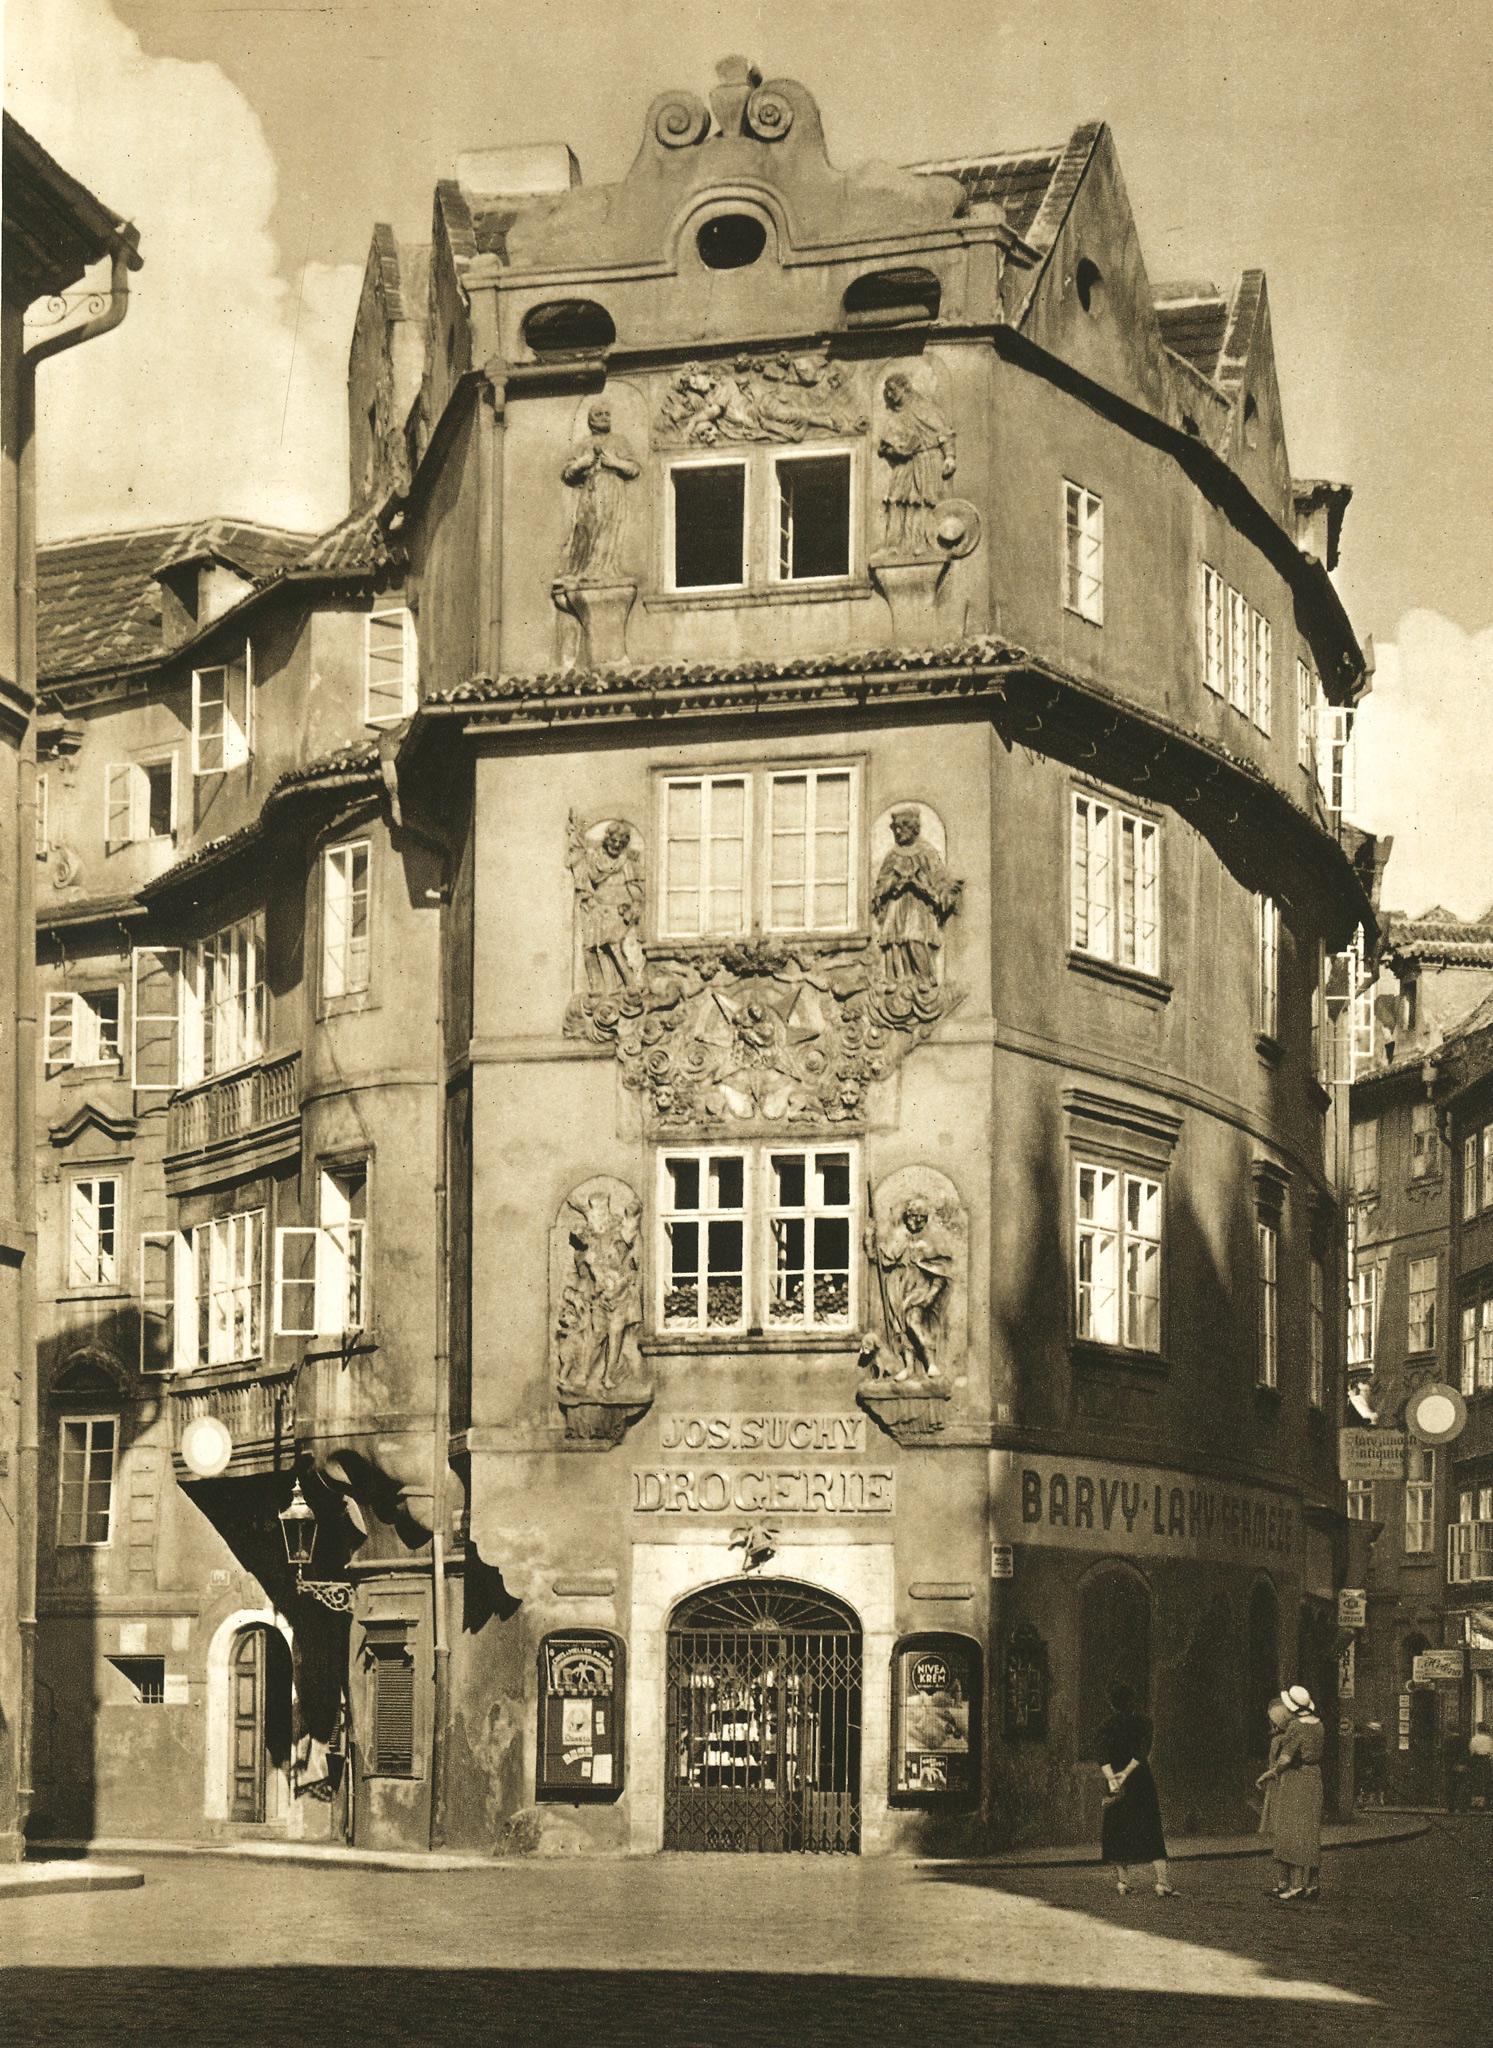 black and white image of a four story building with a 'drogerie' on the ground floor